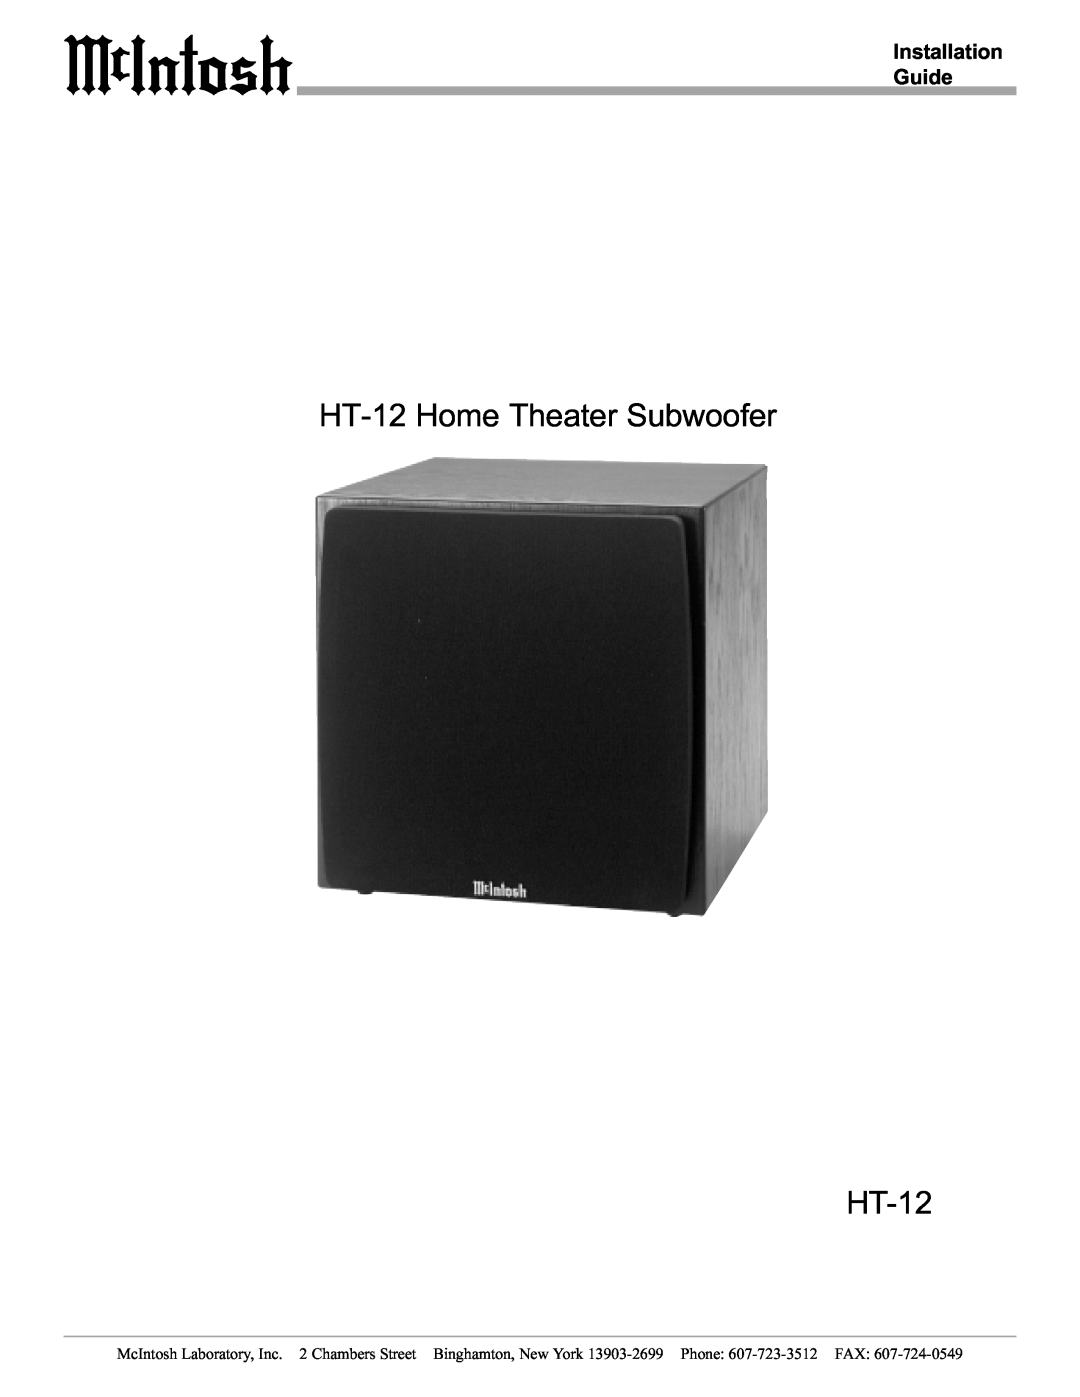 McIntosh manual HT-12Home Theater Subwoofer HT-12, Installation Guide 